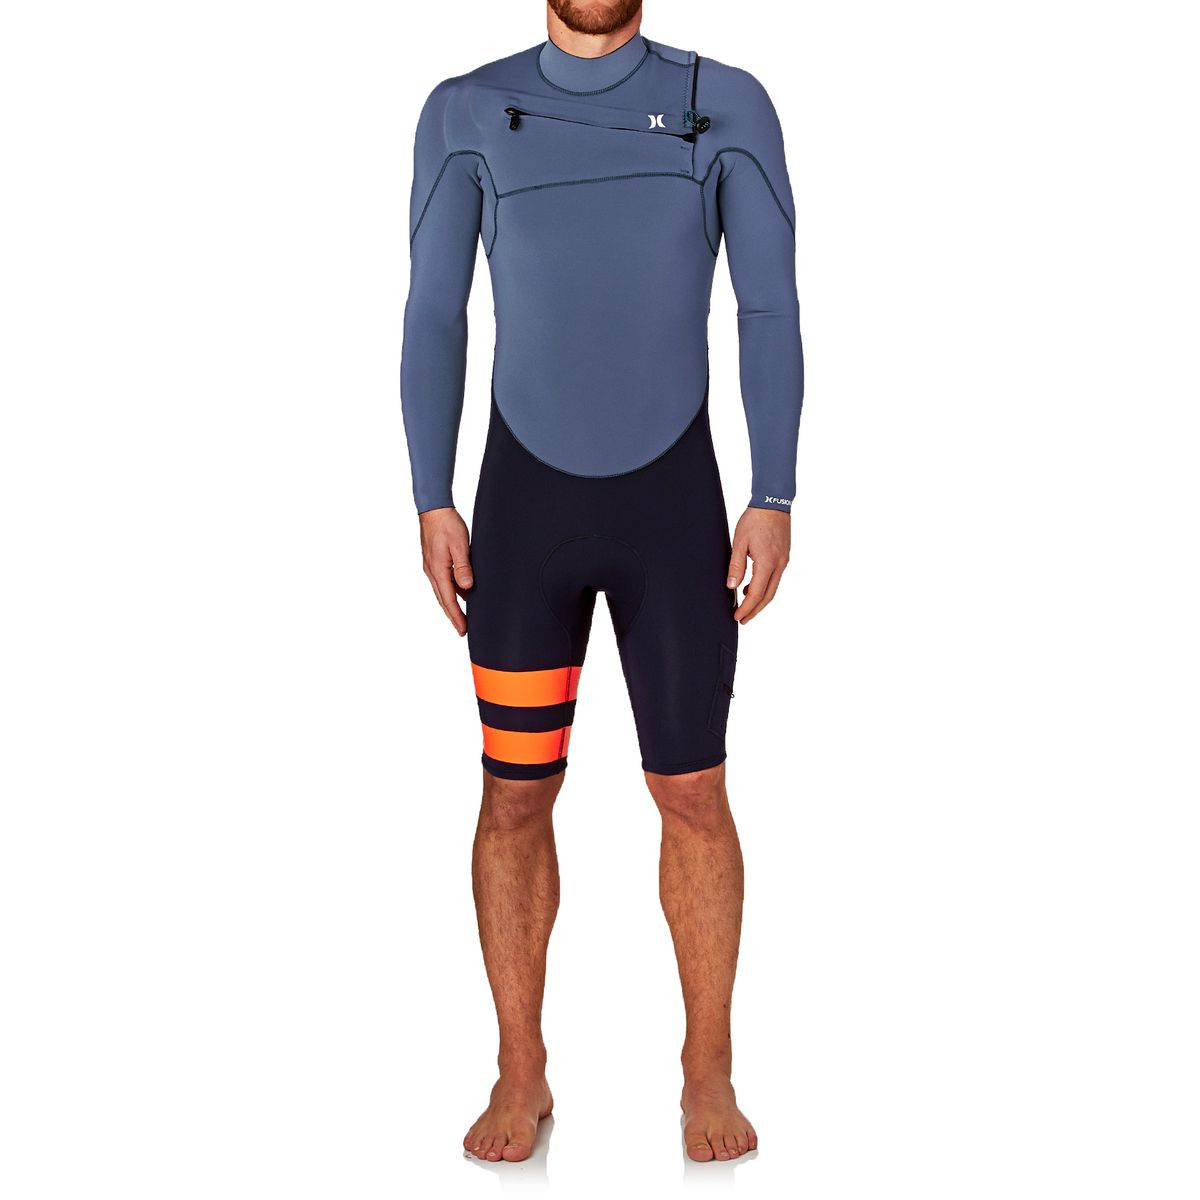 Hurley Fusion 2mm 2017 Chest Zip Long Sleeve Shorty Wetsuit - Obsidian